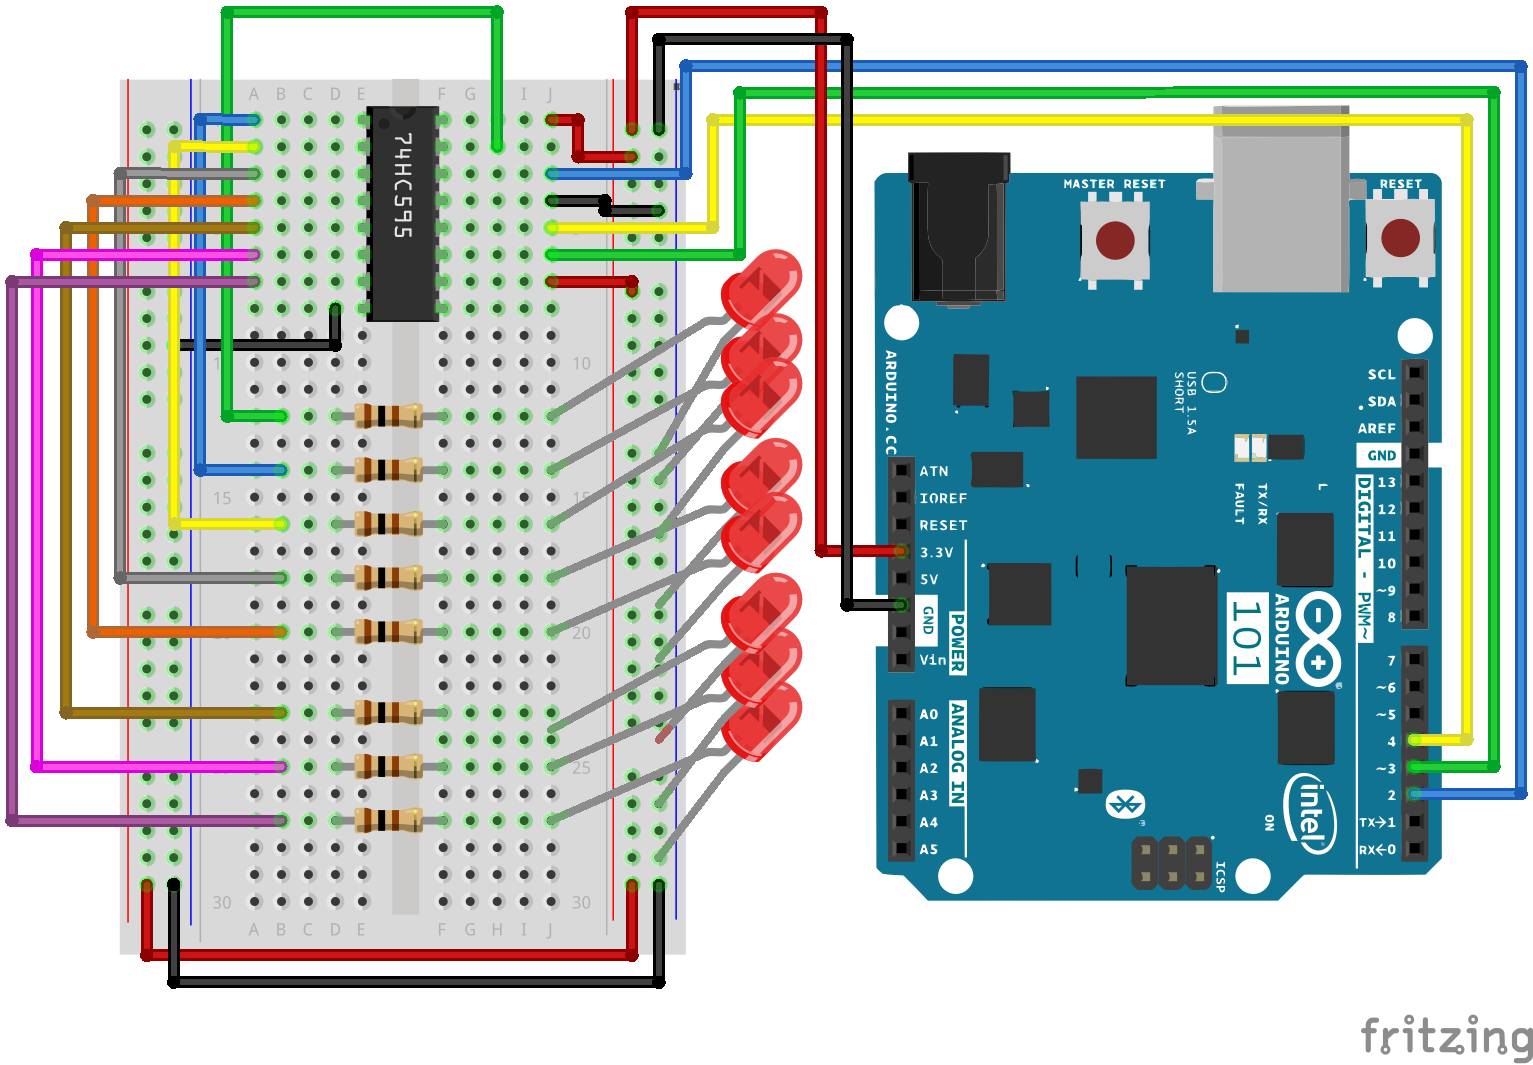 arduino 1.8.5 sik guide